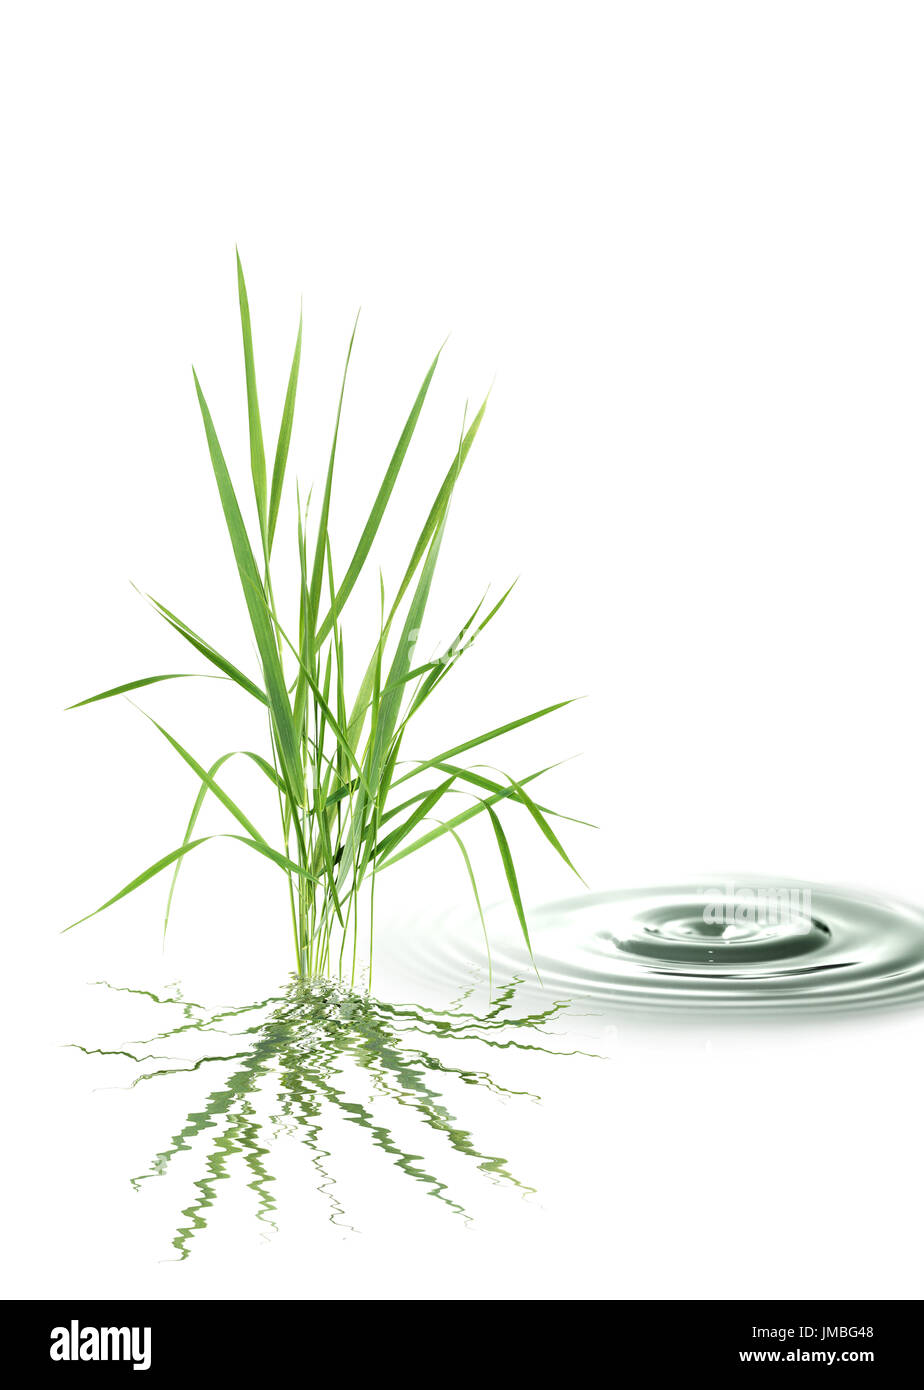 Nature concept. Bunch of green grass near splashing water on white background Stock Photo